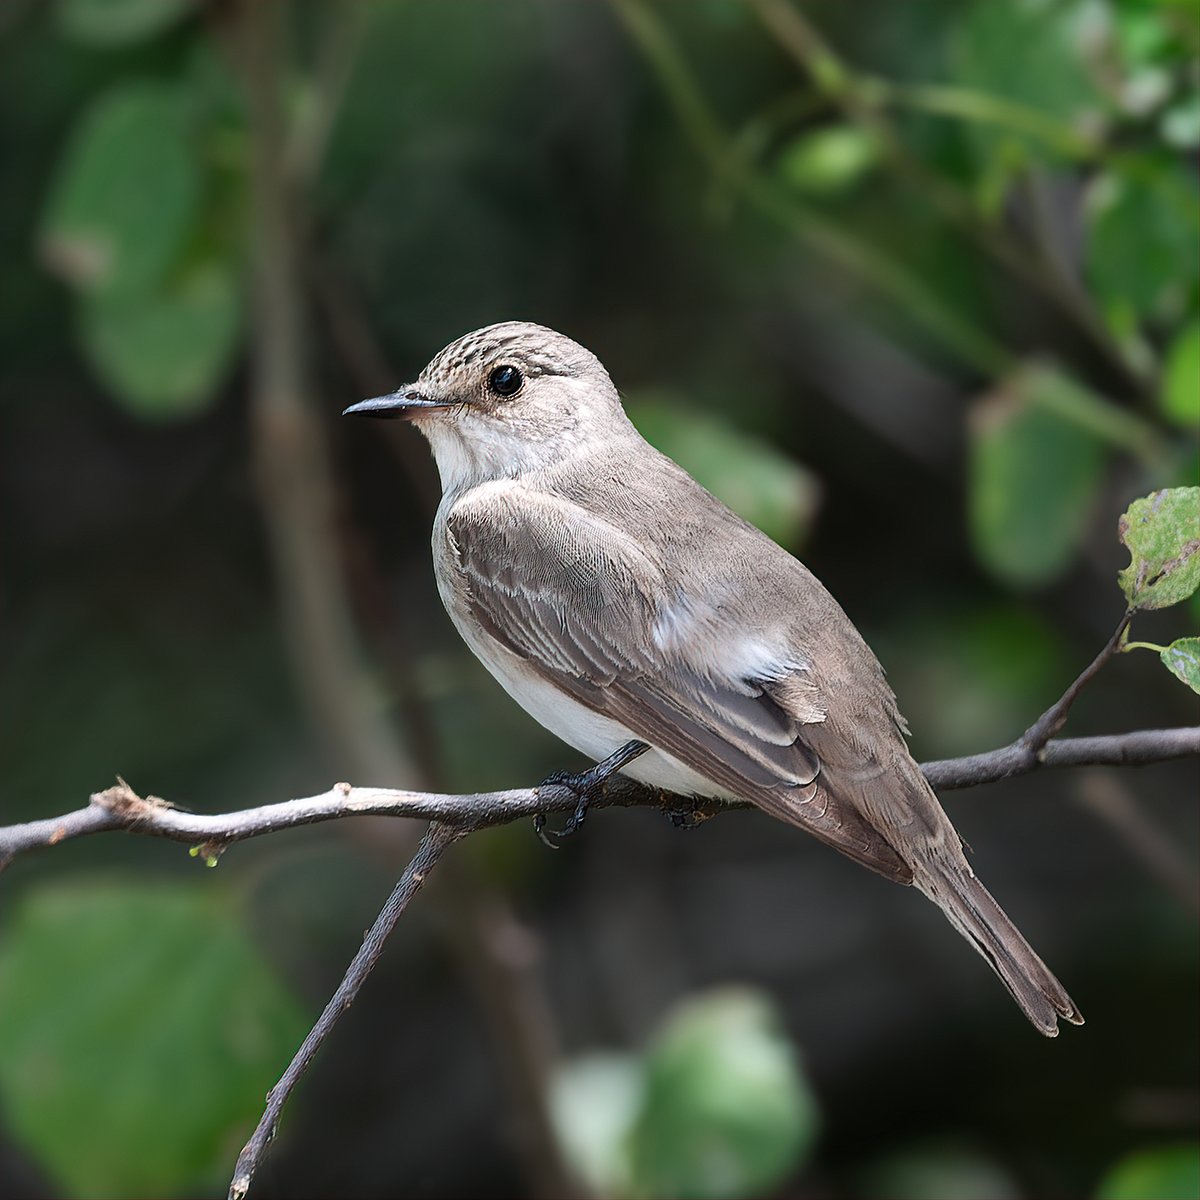 Sharing a series of Passage Migrant birds, passage through Gujarat – India    Do you have any migratory birds? Please feel free to share and comment.        

A drab brown songbird with a streaky white breast & crown.

Spotted Flycatcher - Muscicapa striata

#ThePhotoHour